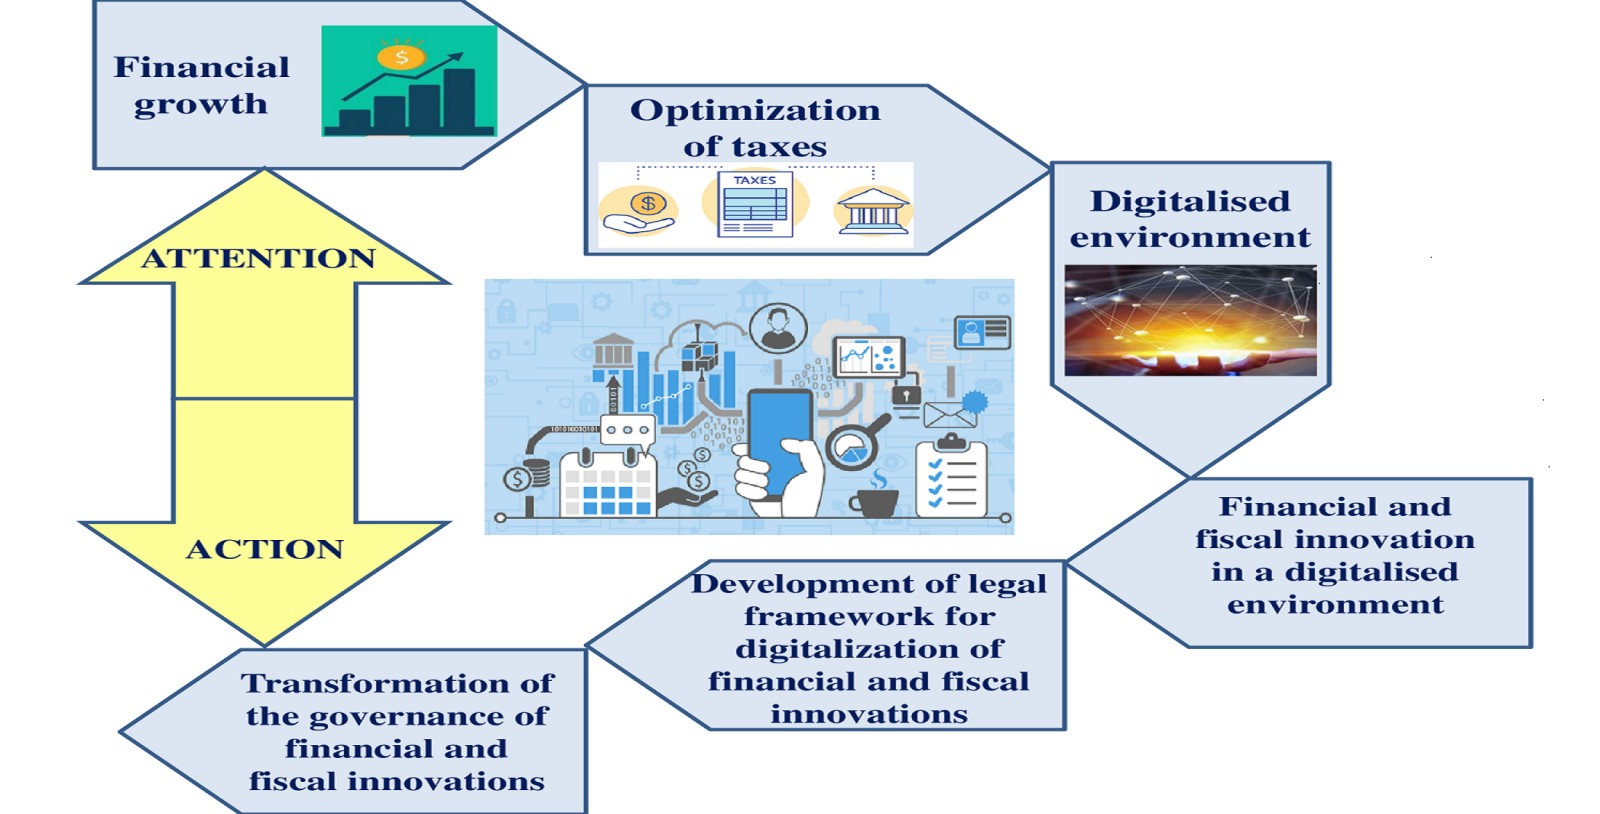 Improving the governance and legal framework for implementing financial and fiscal innovation in a digitalized environment 